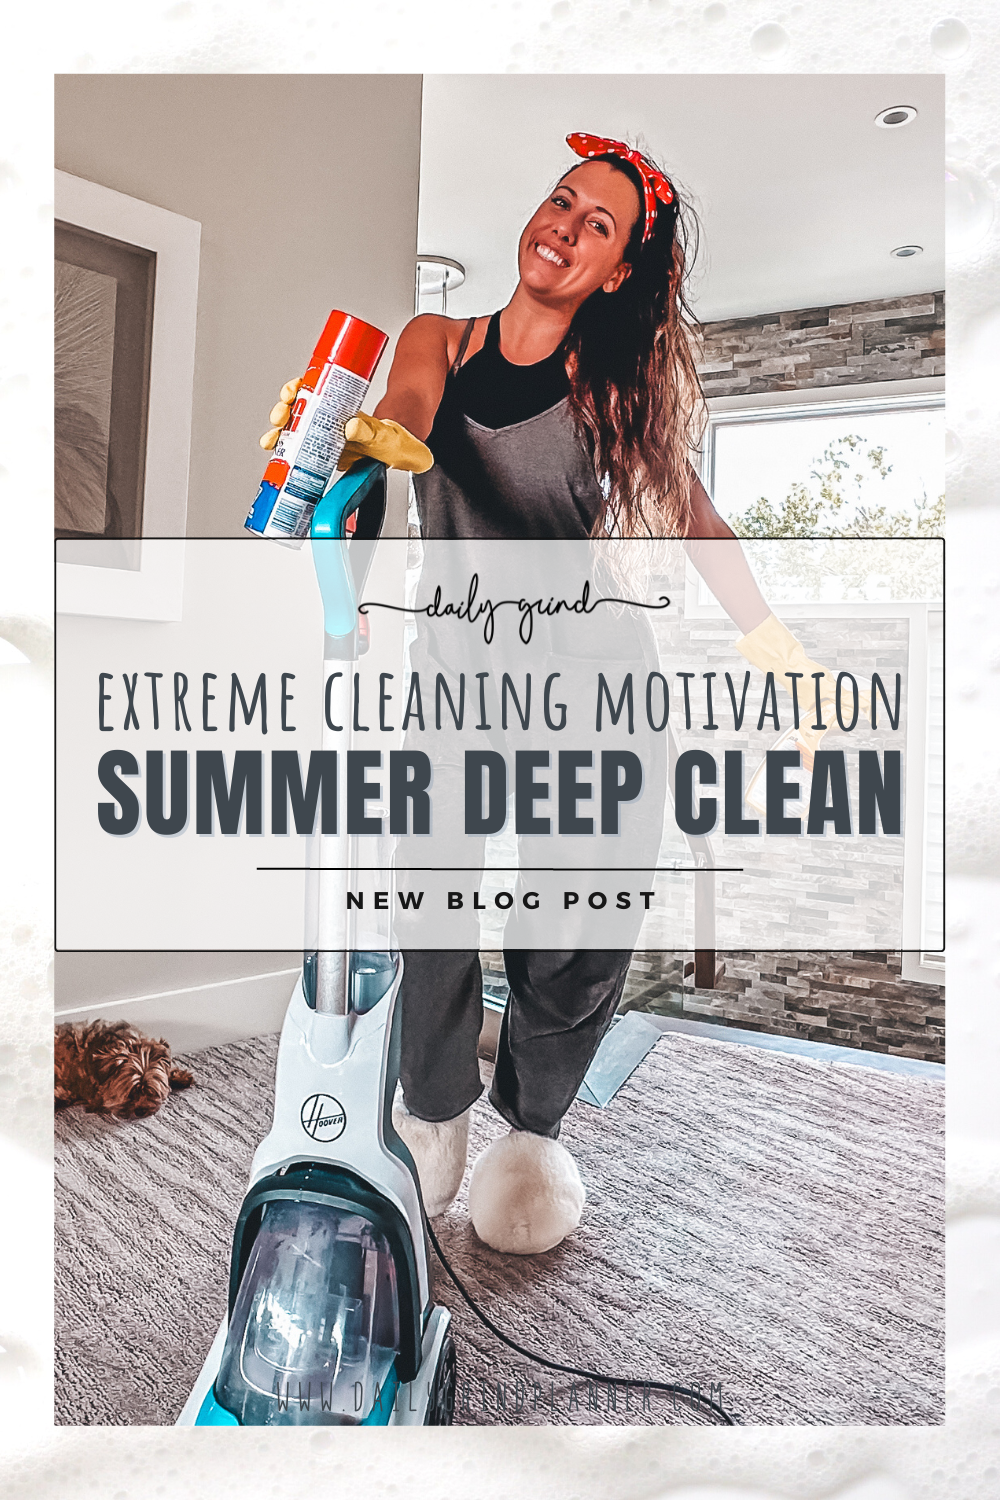 EXTREME CLEANING MOTIVATION: SUMMER DEEP CLEAN